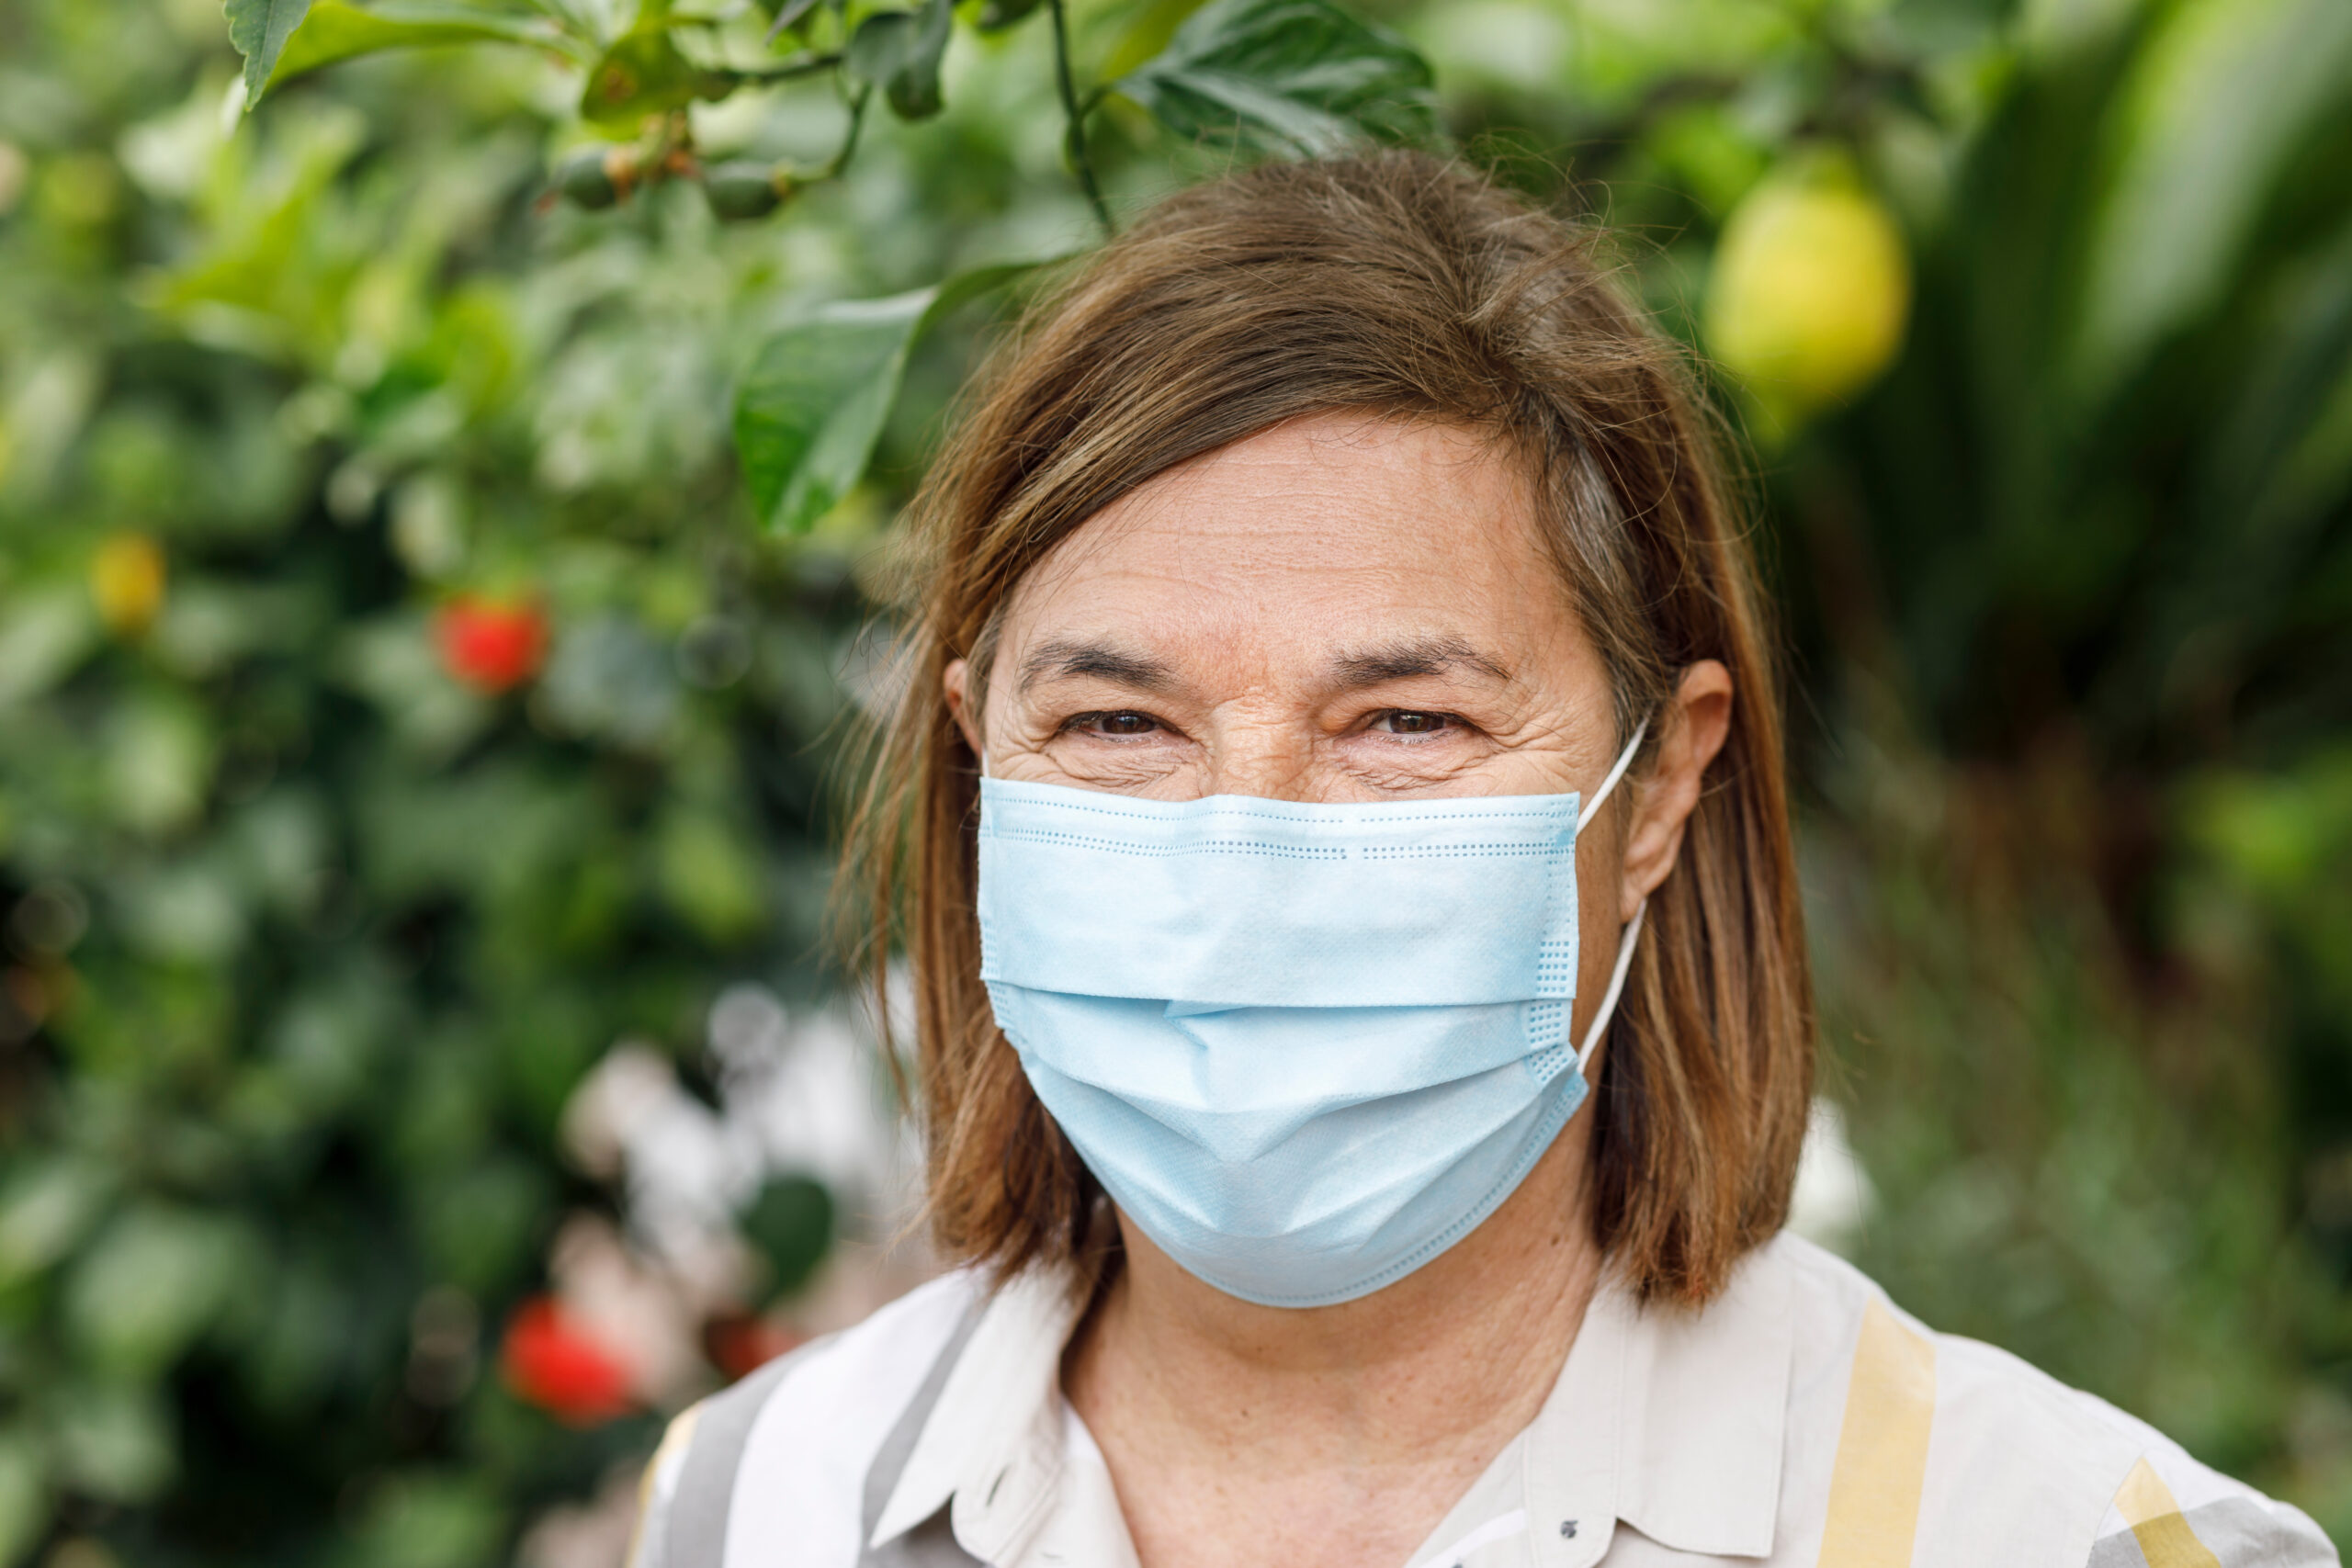 Close up of woman brown bobbed hair wearing a face mask. Blurred green garden background.